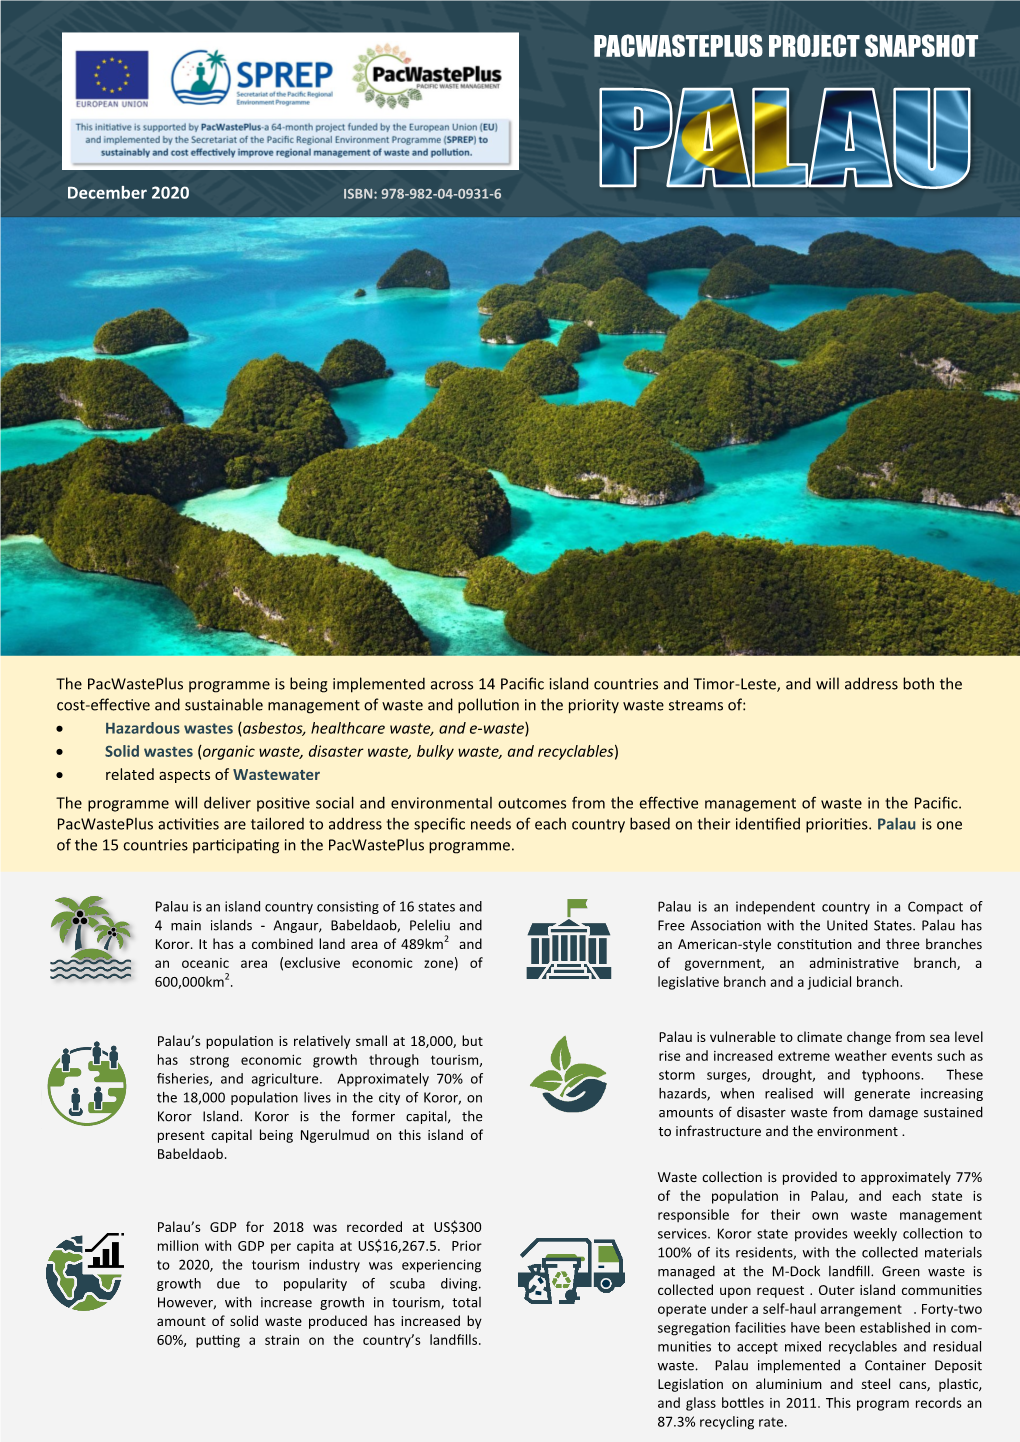 Download Pacwasteplus Project Snapshot-Palau